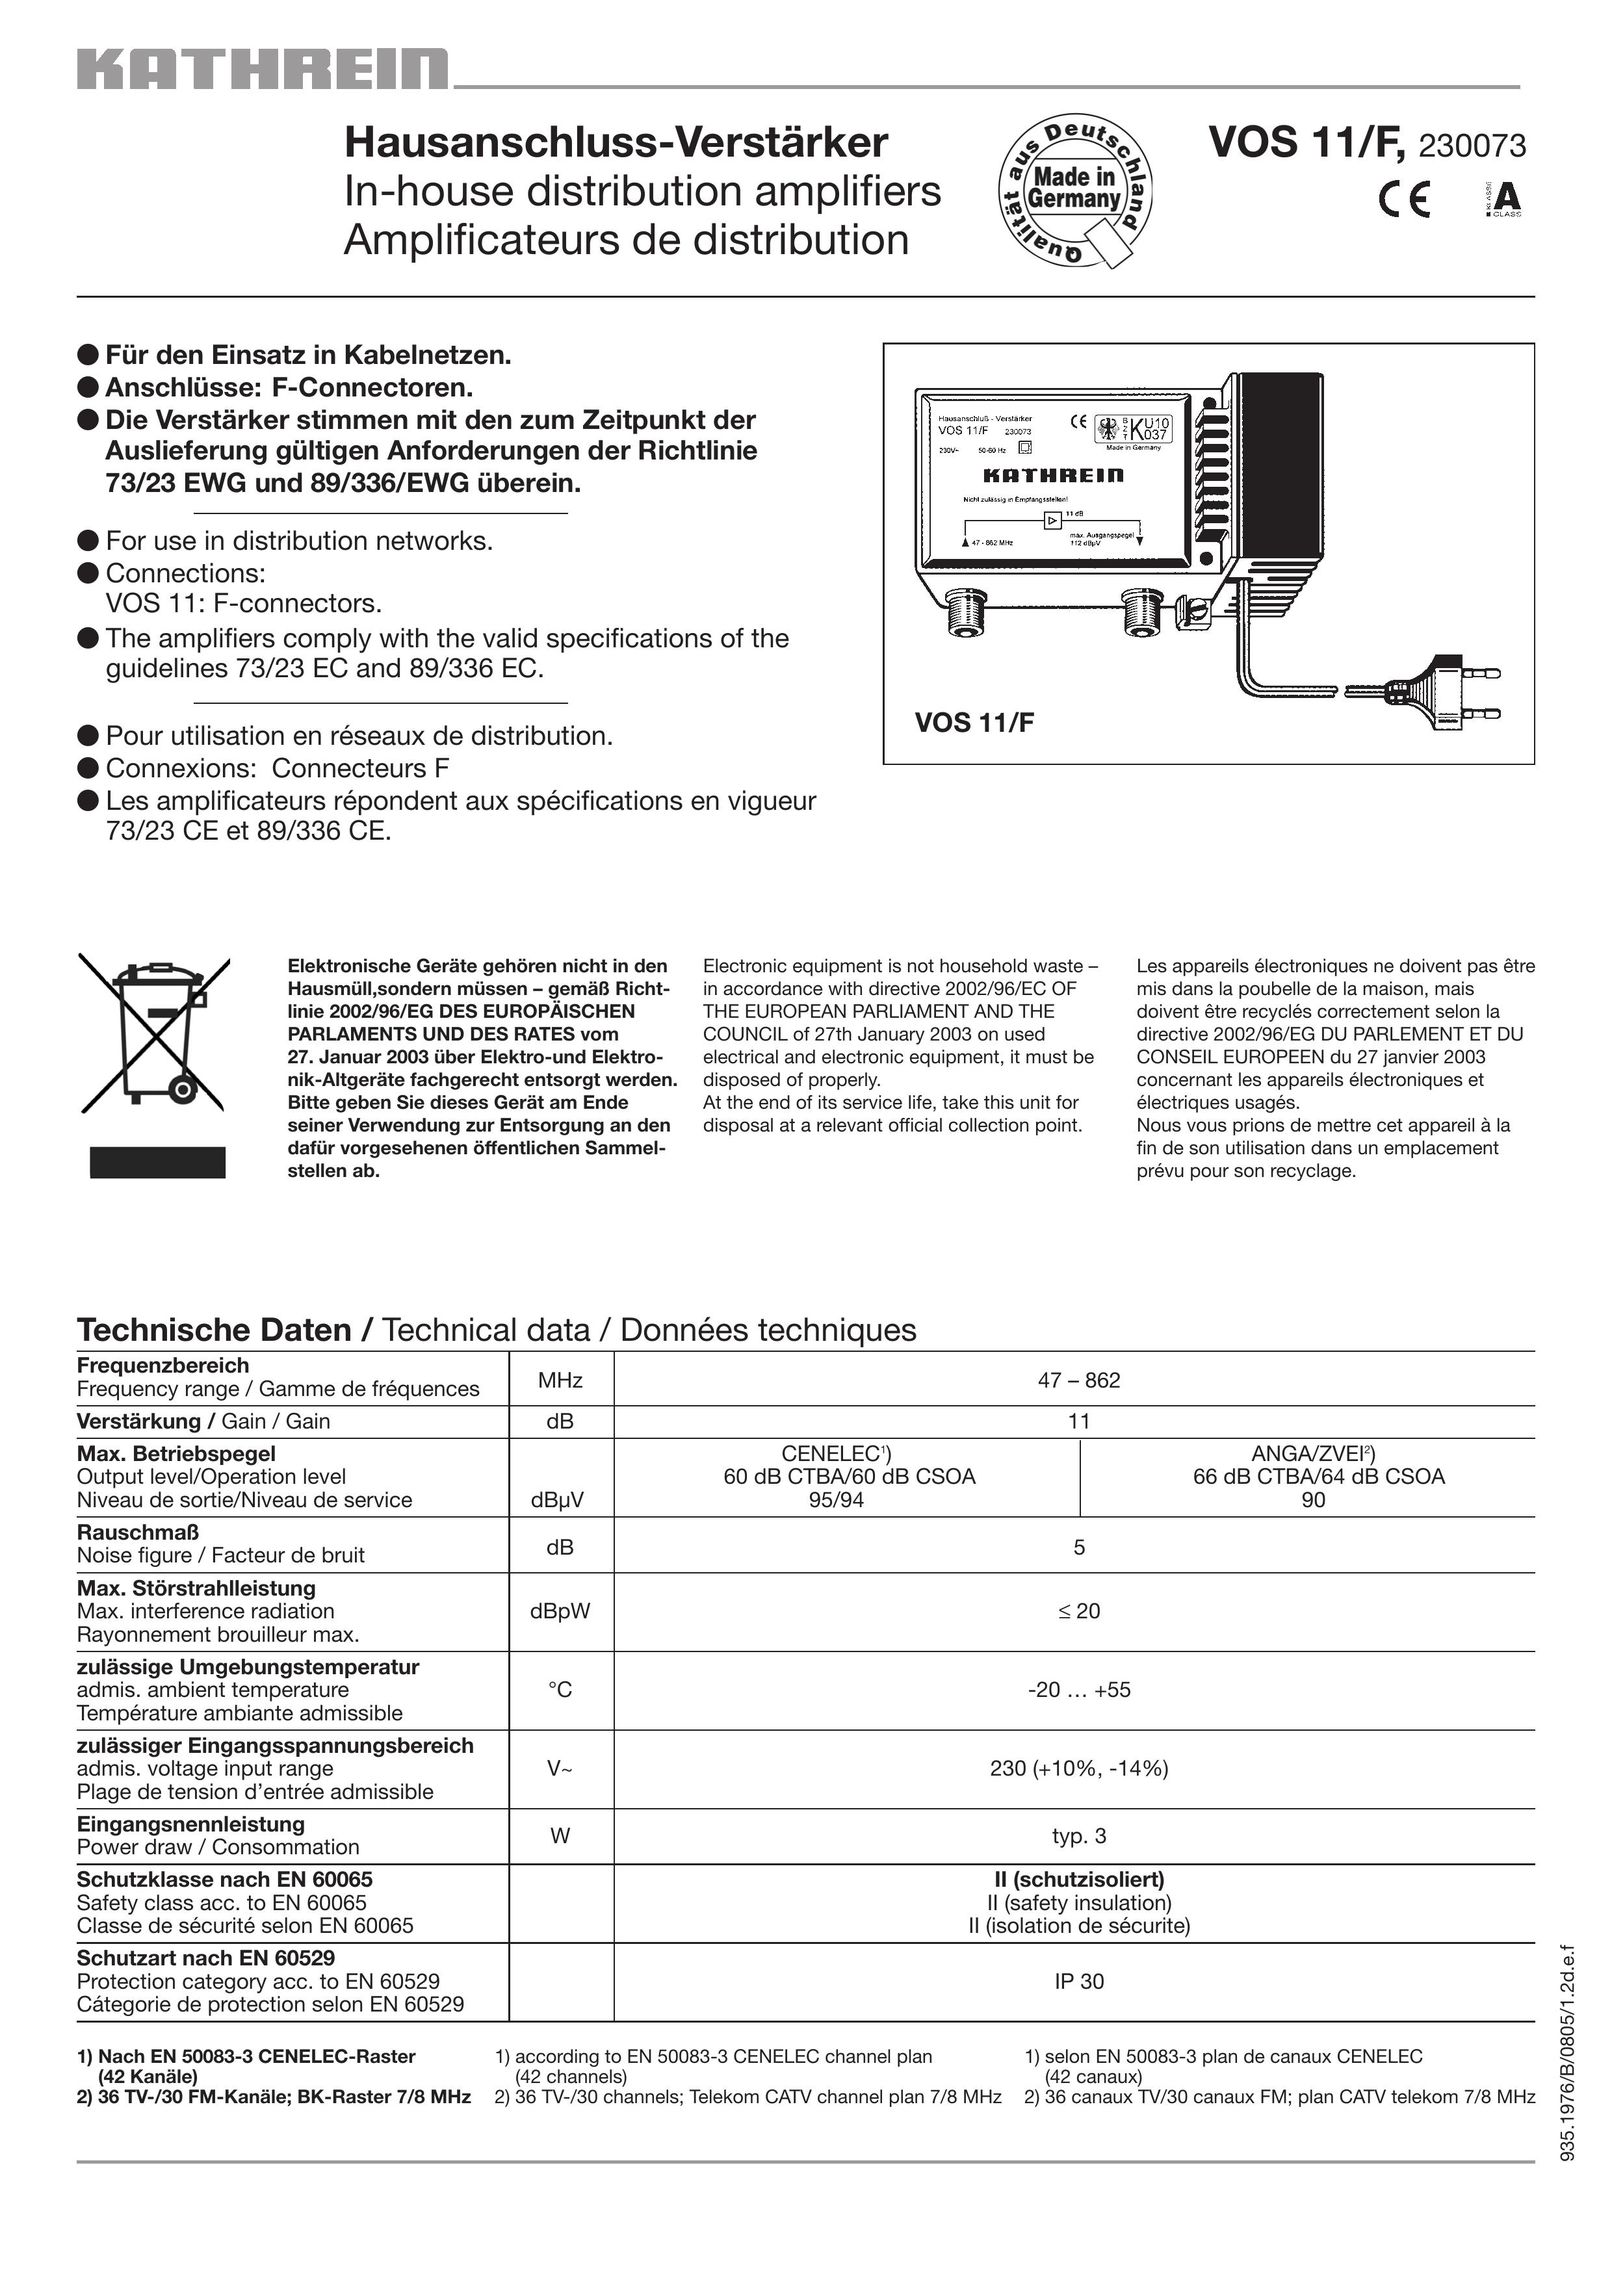 Kathrein VOS 11F Stereo Amplifier User Manual